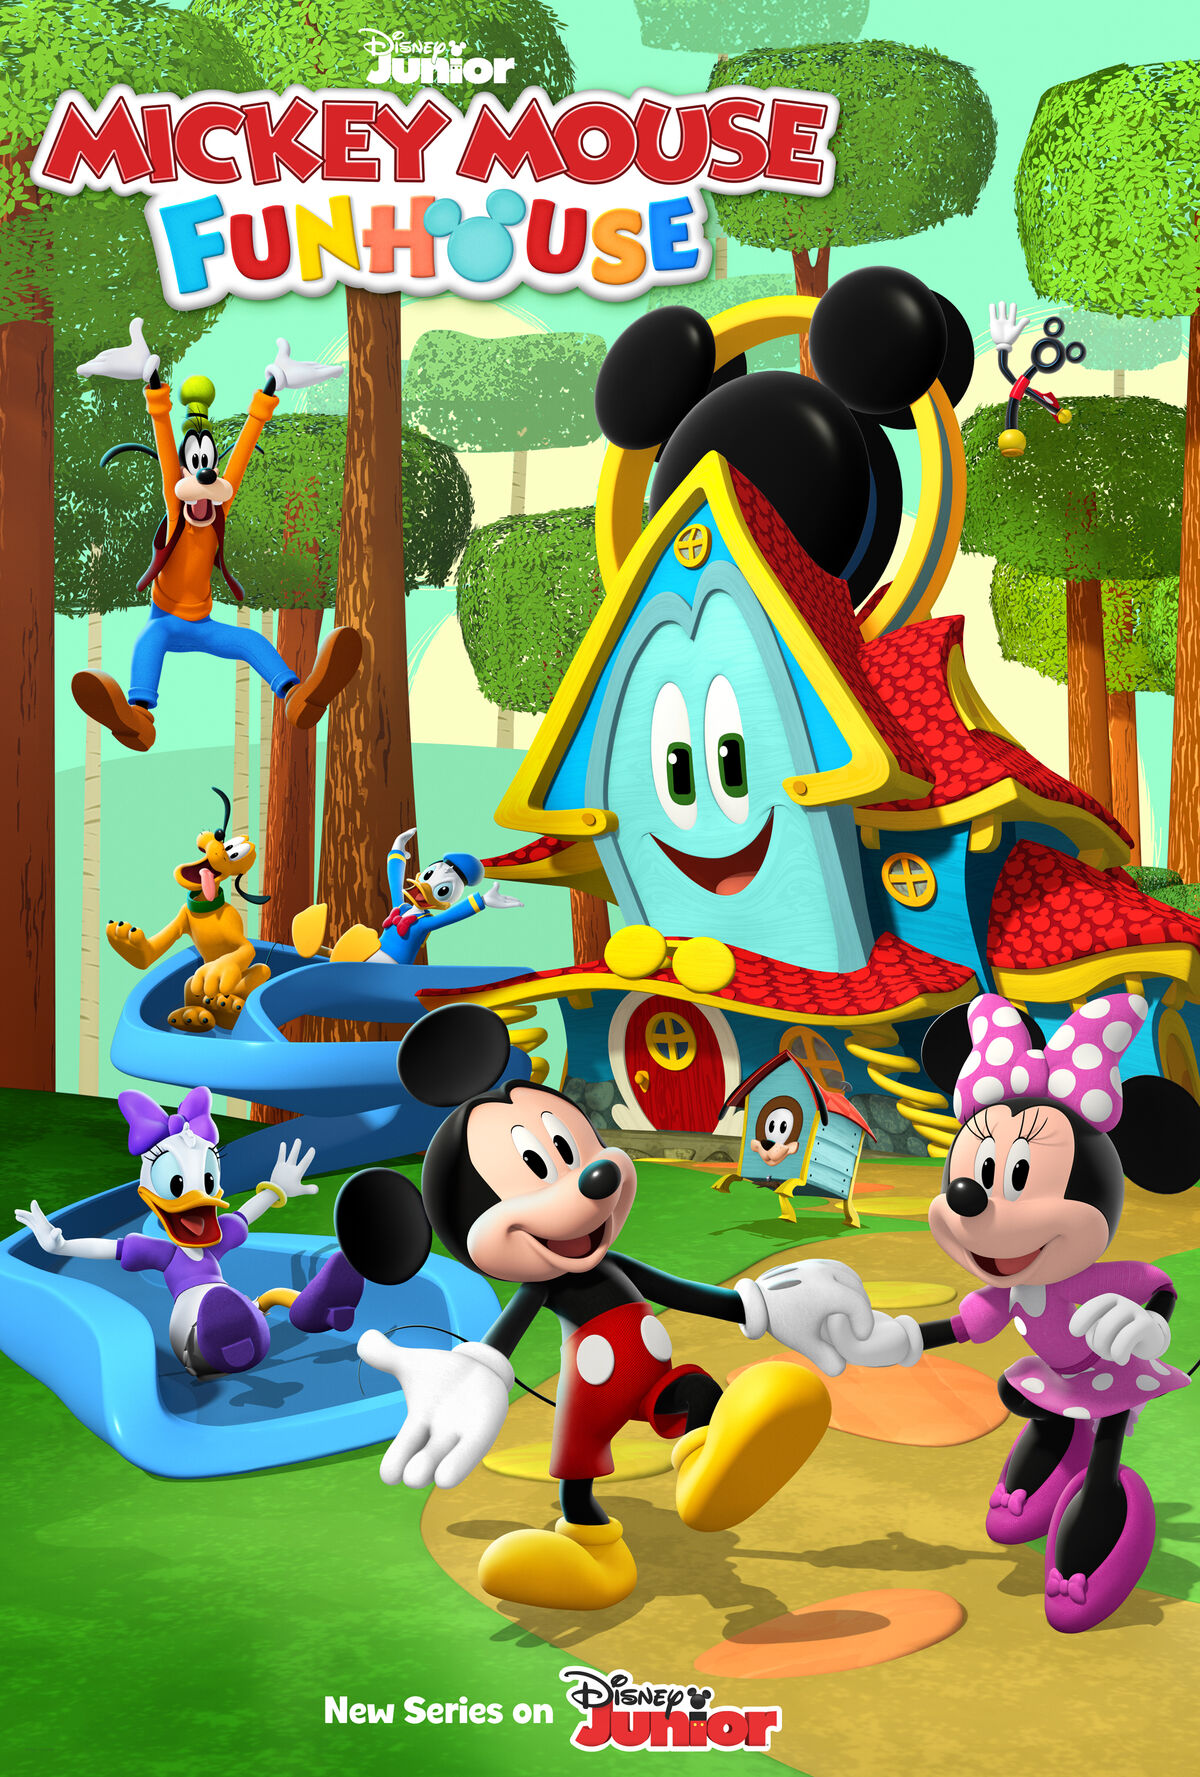 https://static.wikia.nocookie.net/international-entertainment-project/images/d/d0/Mickey_Mouse_Funhouse_poster_%281%29.jpg/revision/latest/scale-to-width-down/1200?cb=20220114183527